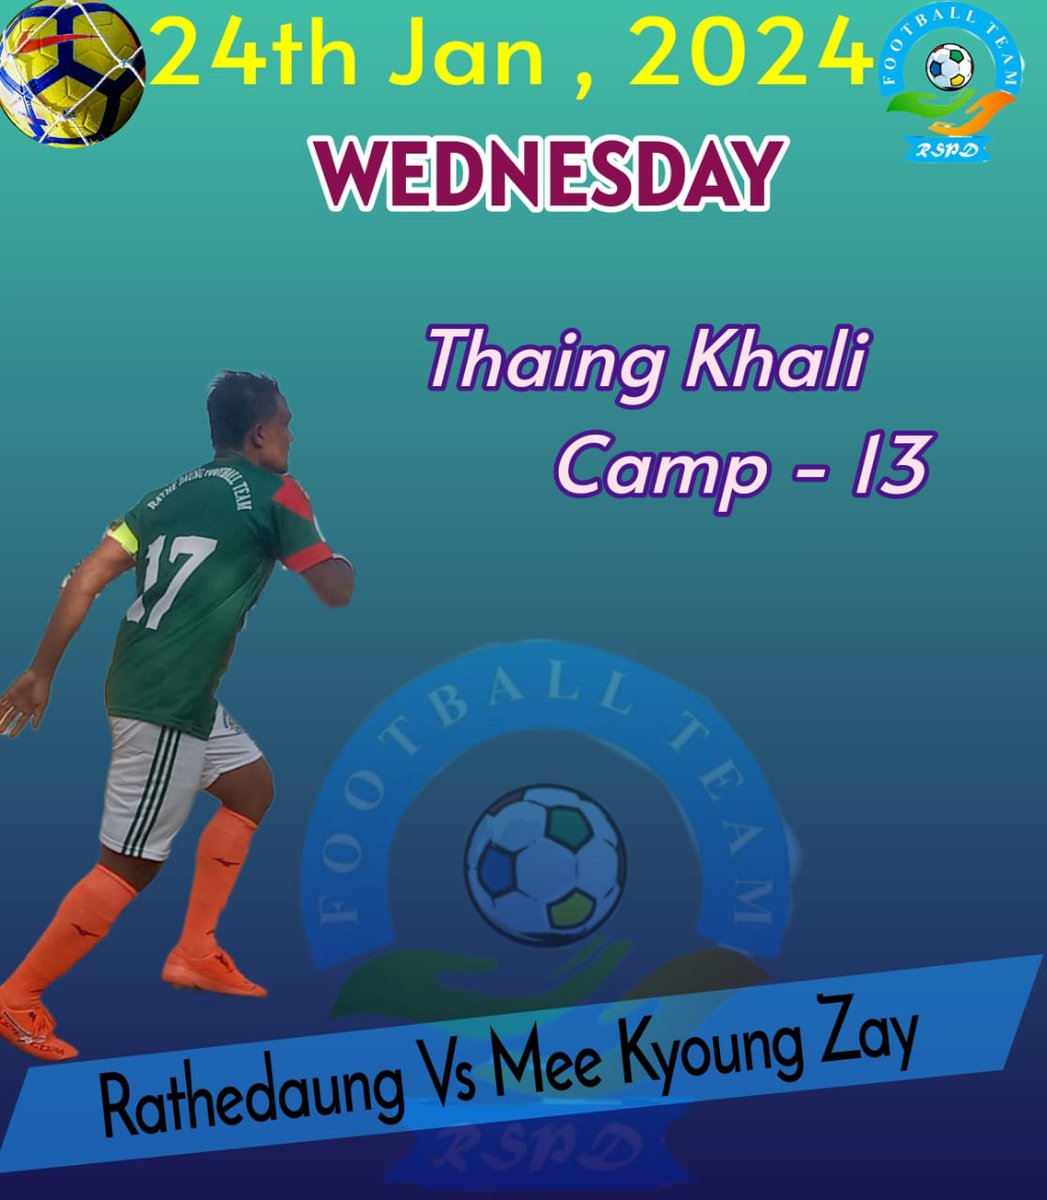 Congratulations to our Rathedaung Football Team, Upcoming match tomorrow in Thaying Khali, at camp-13. Since 24th January, 2024, at 02:00 PM sharp, (Wednesday)

(Rathedaung football Team Vs Mee Kyoung Zay Football Team)

#football
 #footballplayer
 #footballmatch